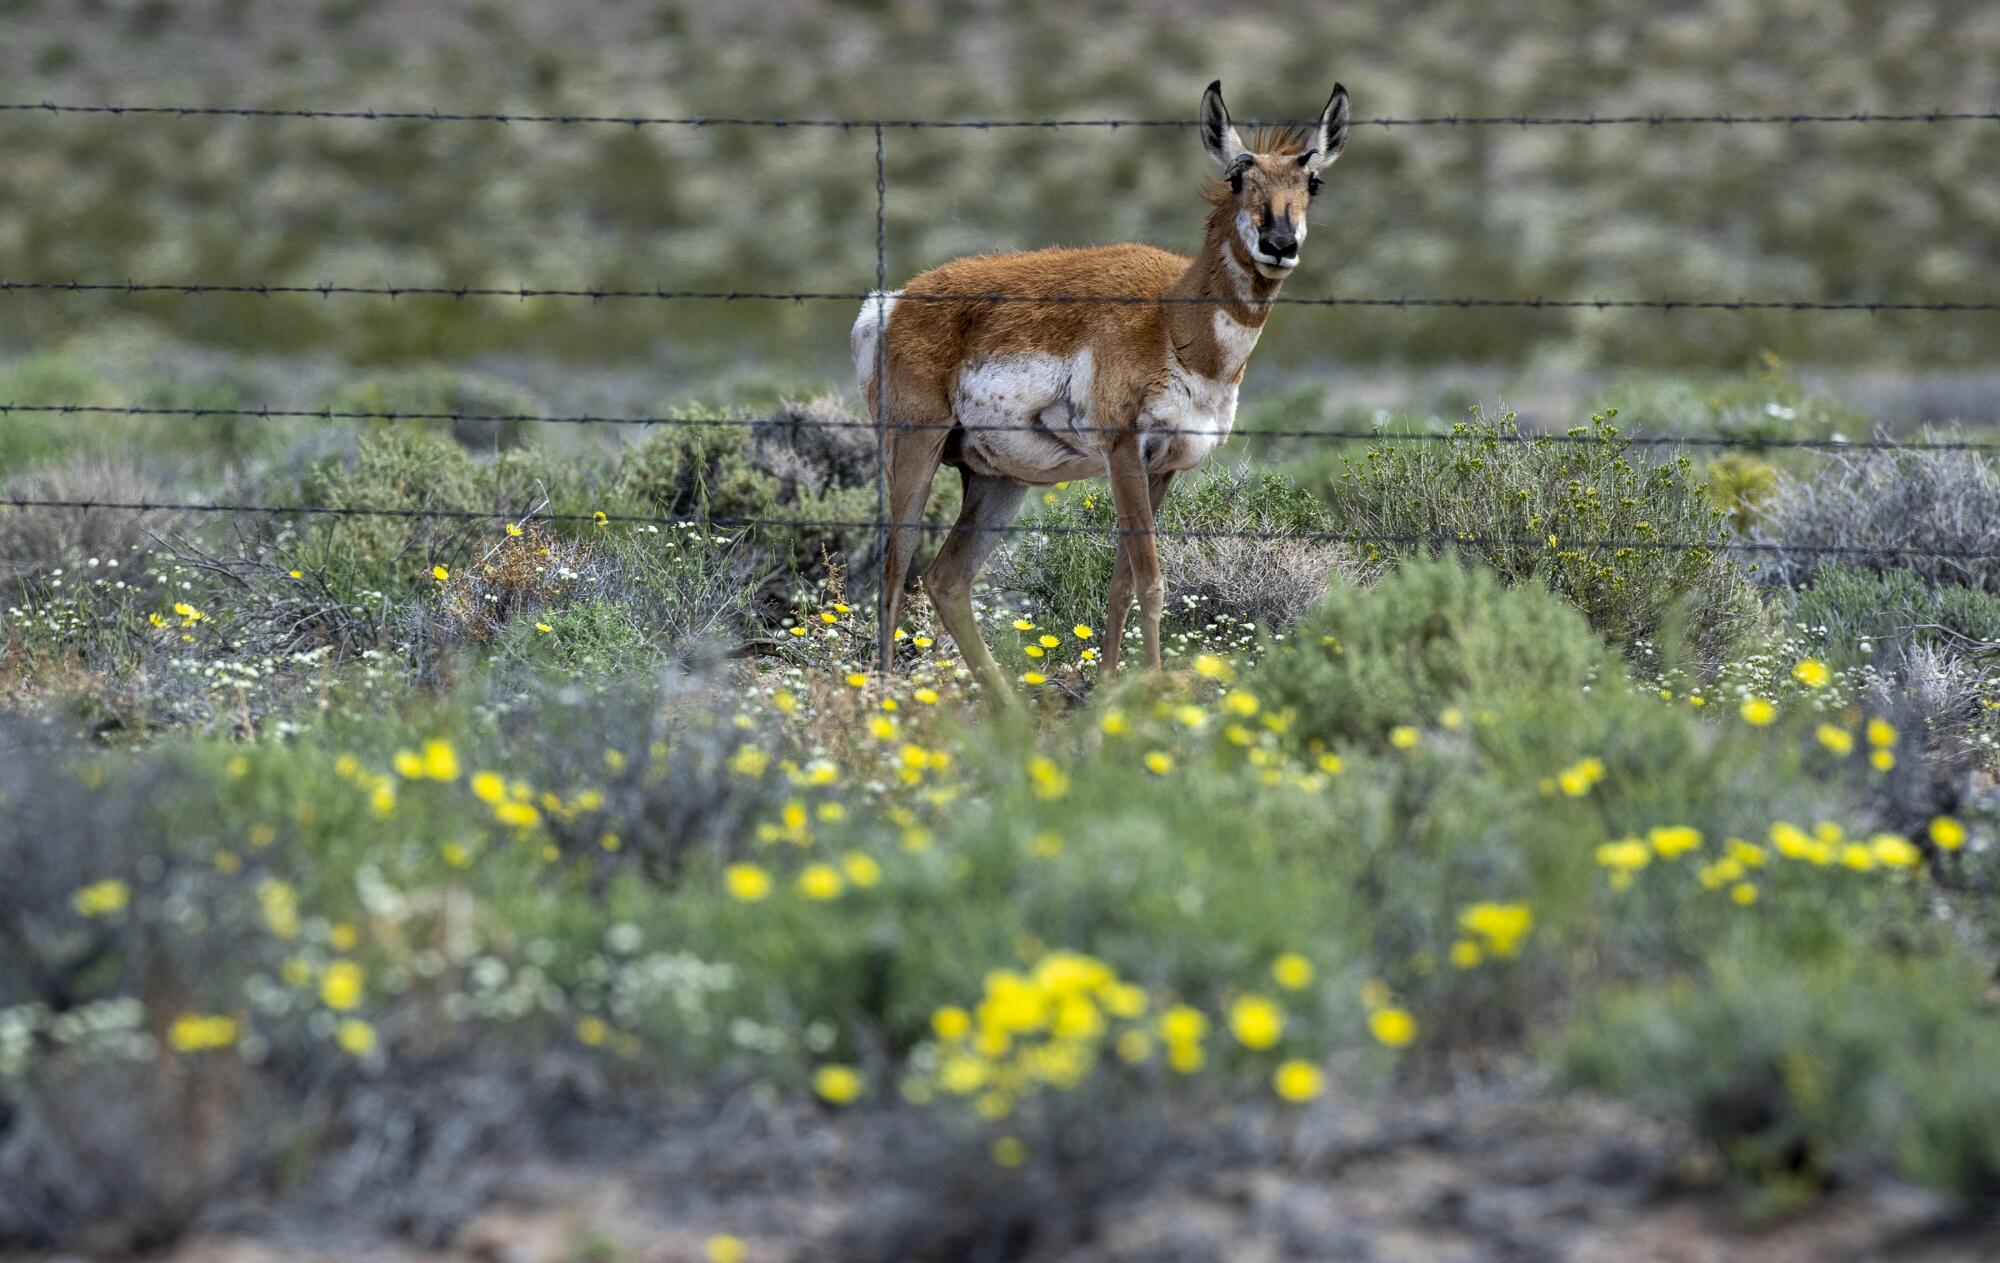 A pronghorn antelope pauses while eating wildflowers along a highway where cattle once grazed near the Mojave Desert town of Beatty, Nev. "Pronghorn are following lush buffets of rain-fed wildflowers," said Laura Cunningham, California director of the nonprofit Western Watersheds Project.